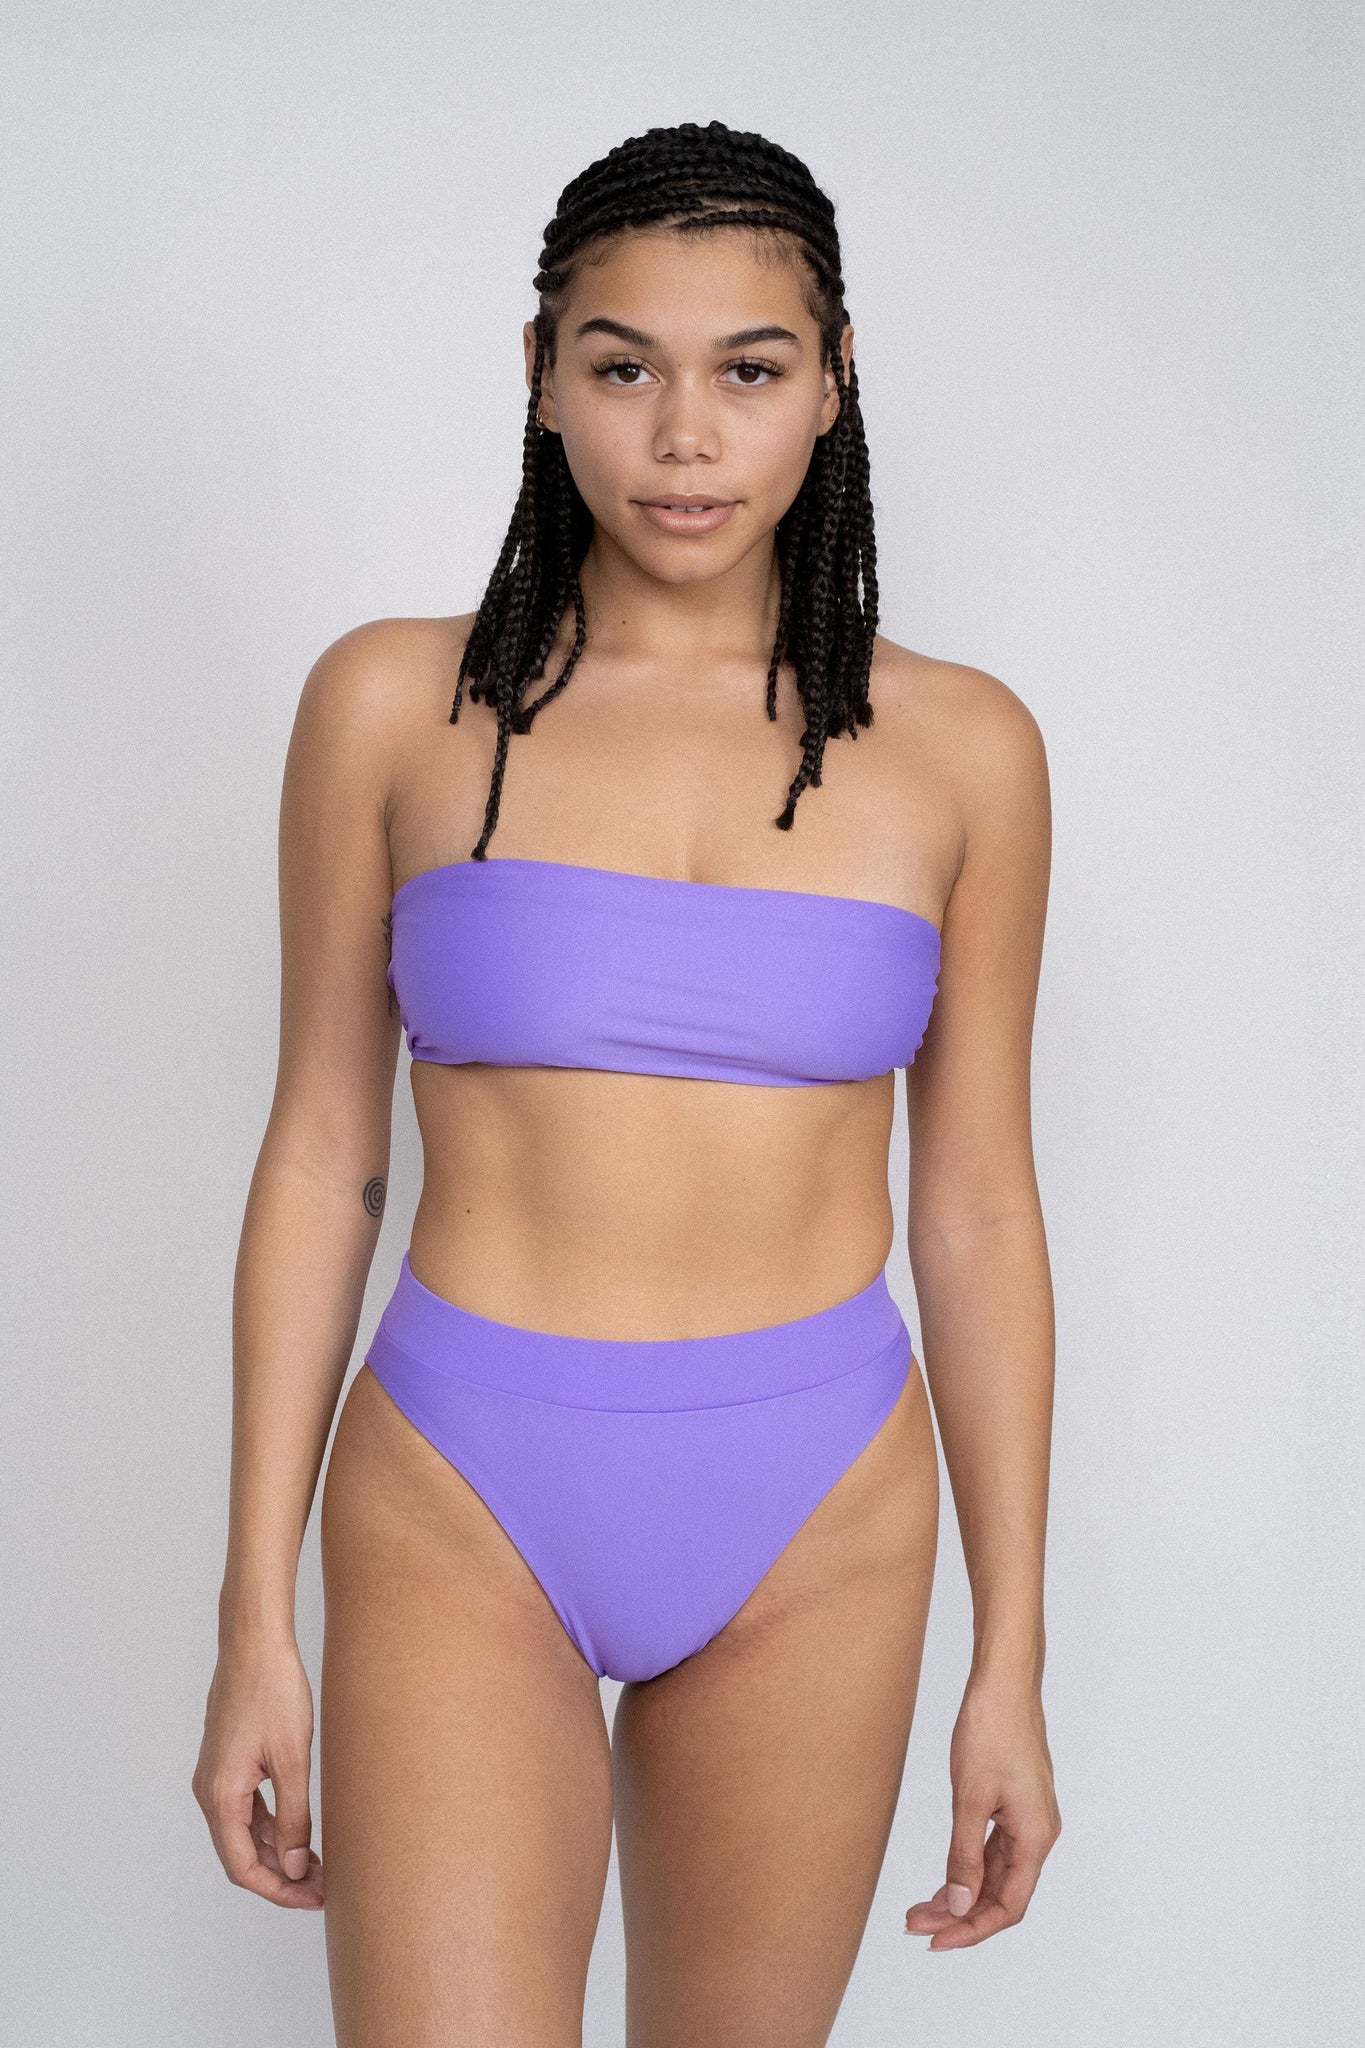 A woman standing with her arms by her side wearing bright purple high waisted bikini bottoms and a matching bright purple strapless bikini top.